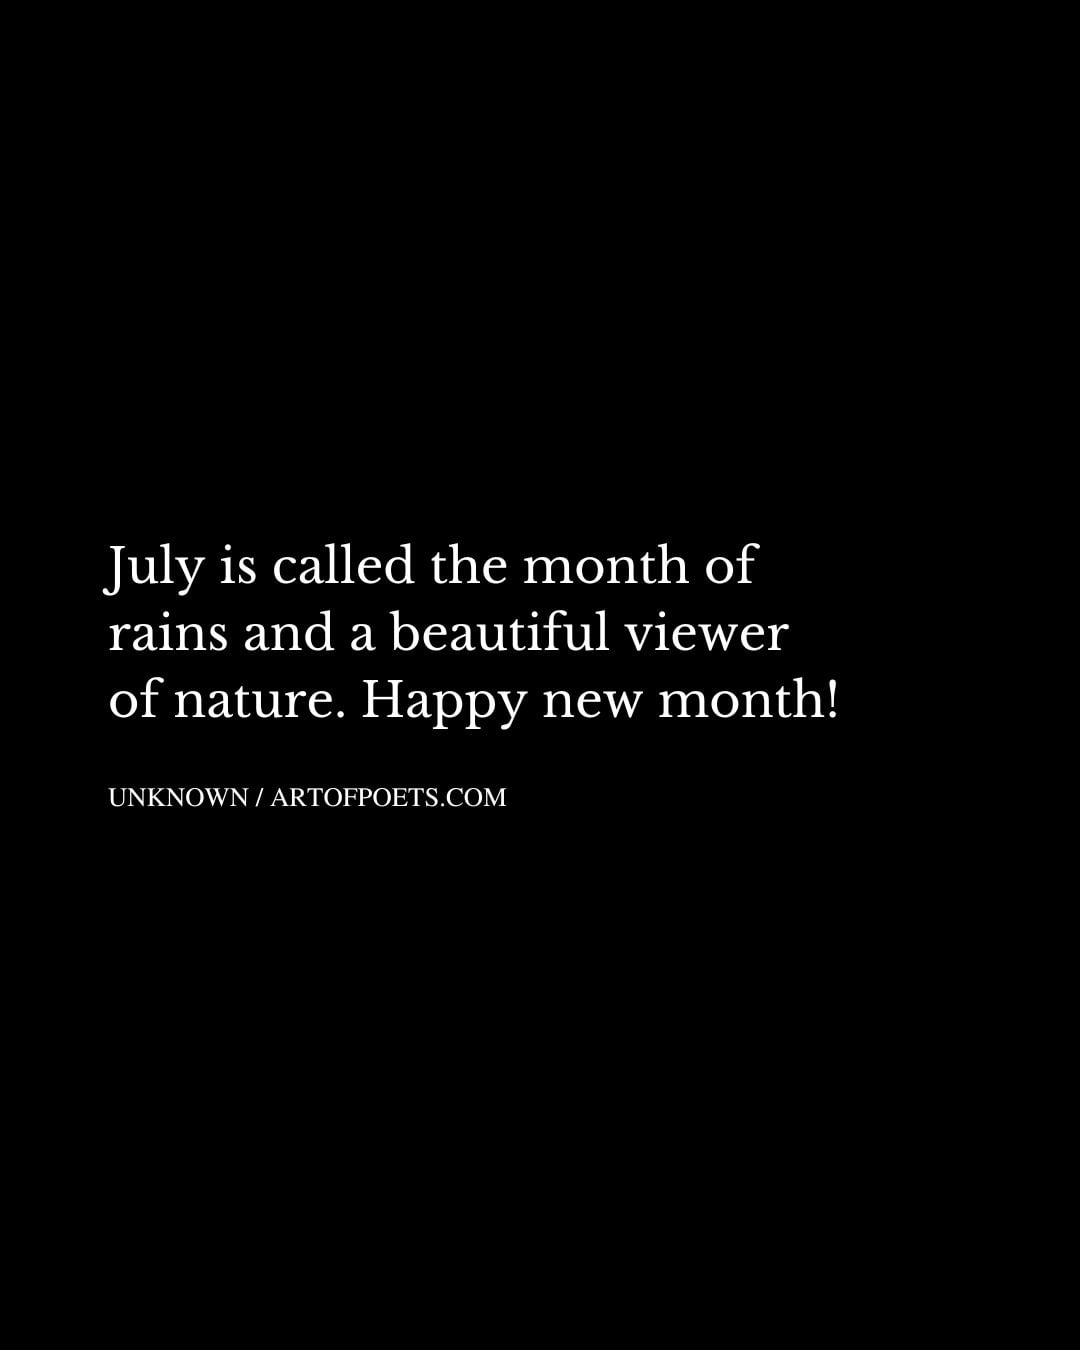 July is called the month of rains and a beautiful viewer of nature. Happy new month